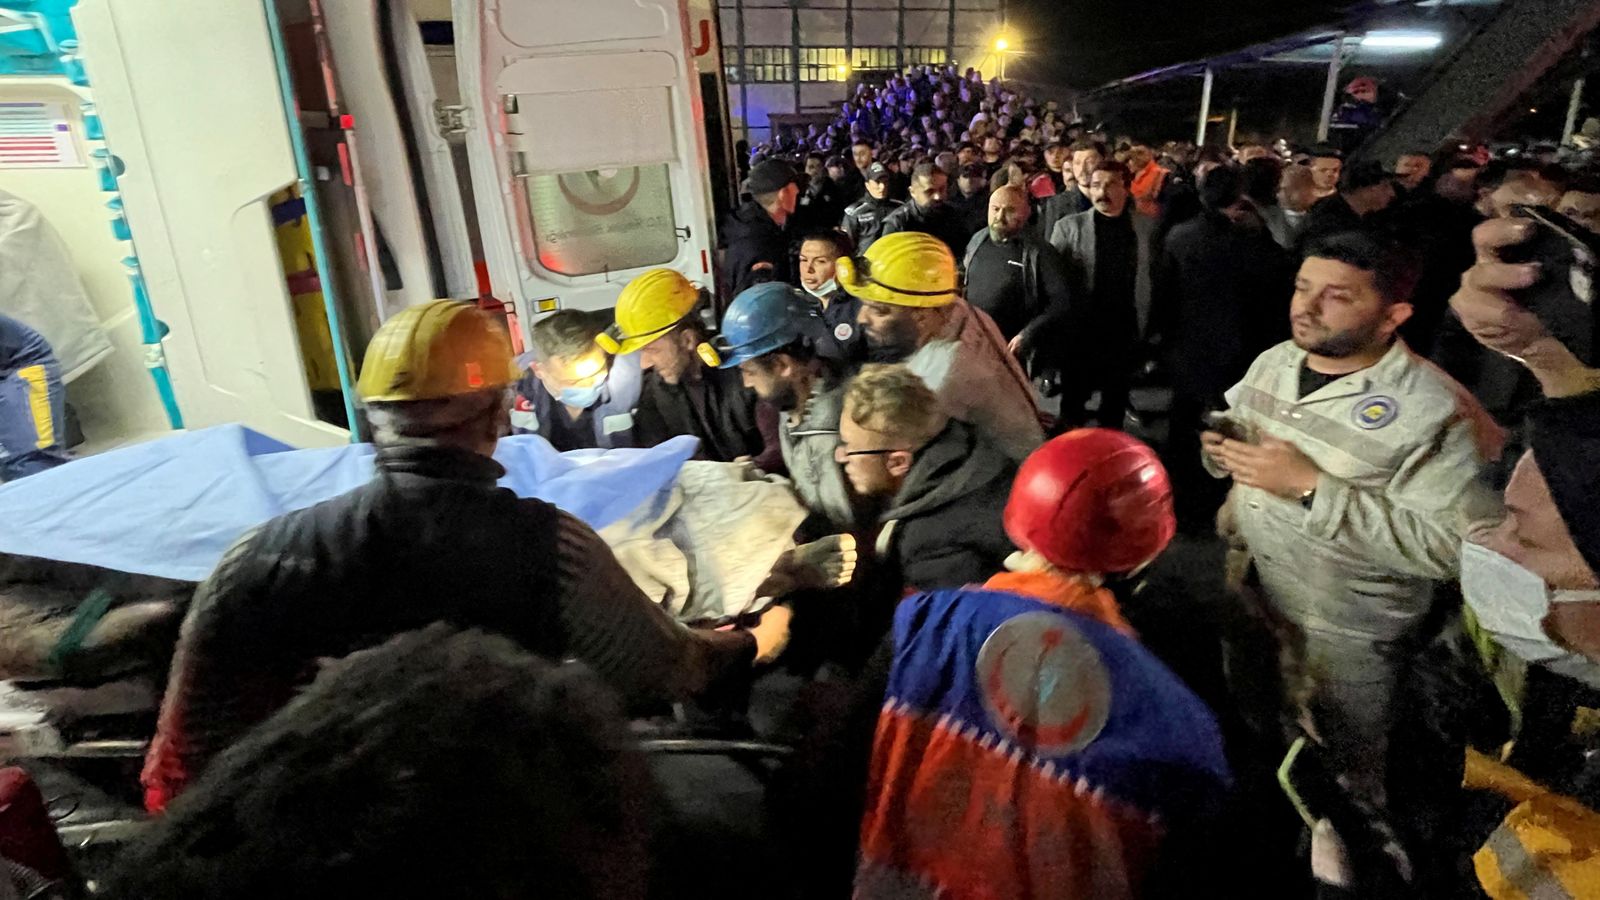 Explosion inside Turkey coal mine kills at least 28 people - with many more still trapped inside